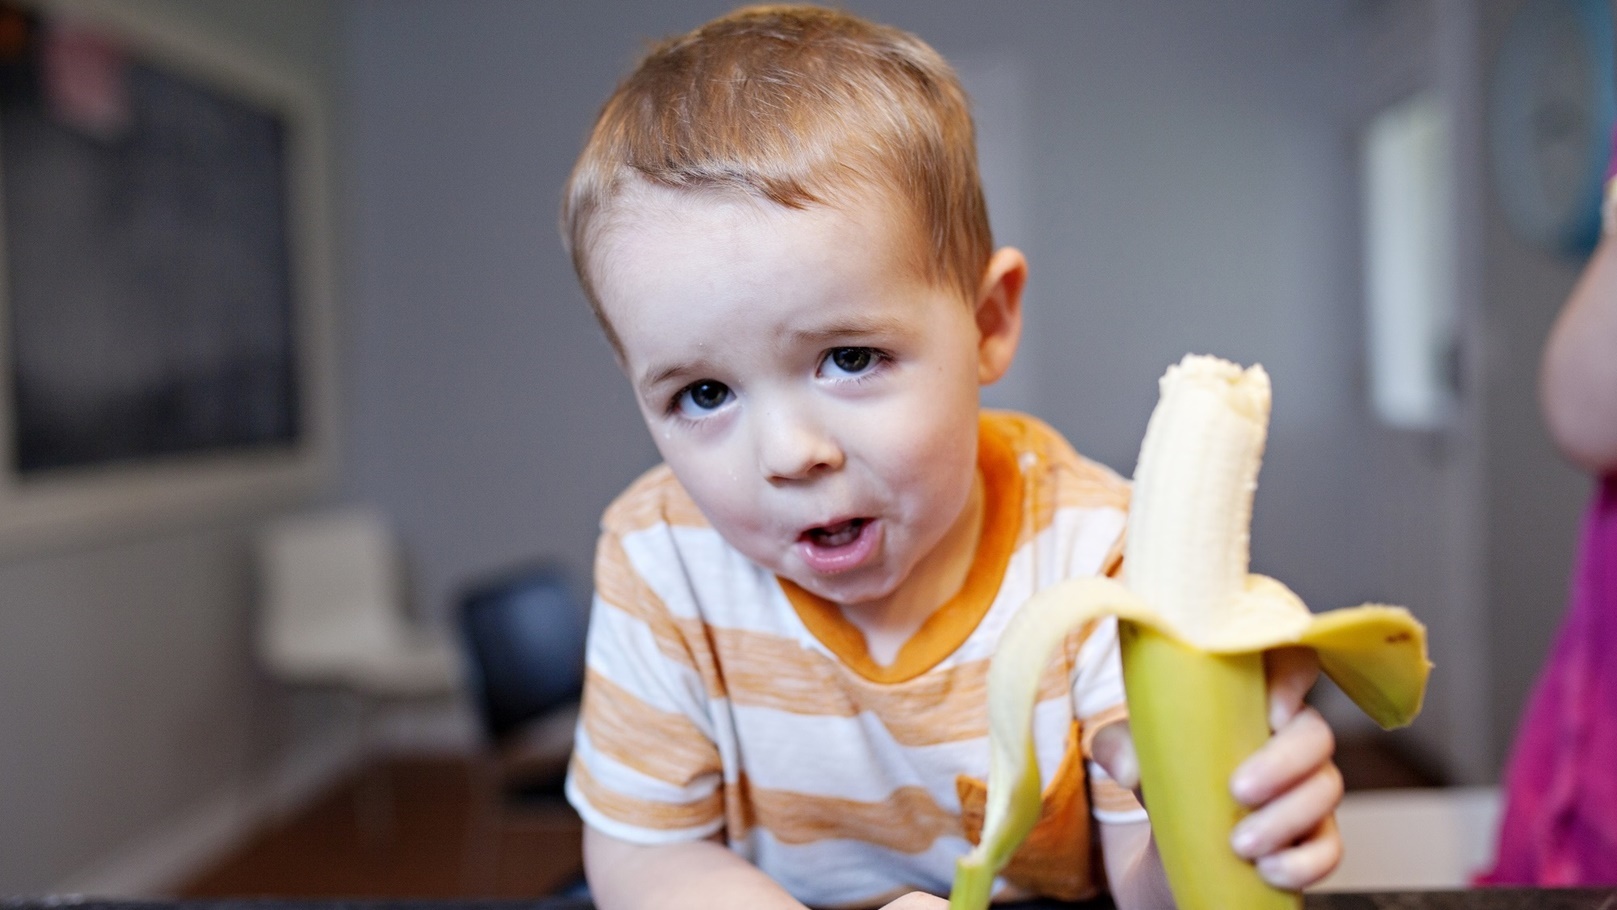 toddler-making-a-silly-face-while-eating-a-banana-2021-08-29-01-00-15-utc